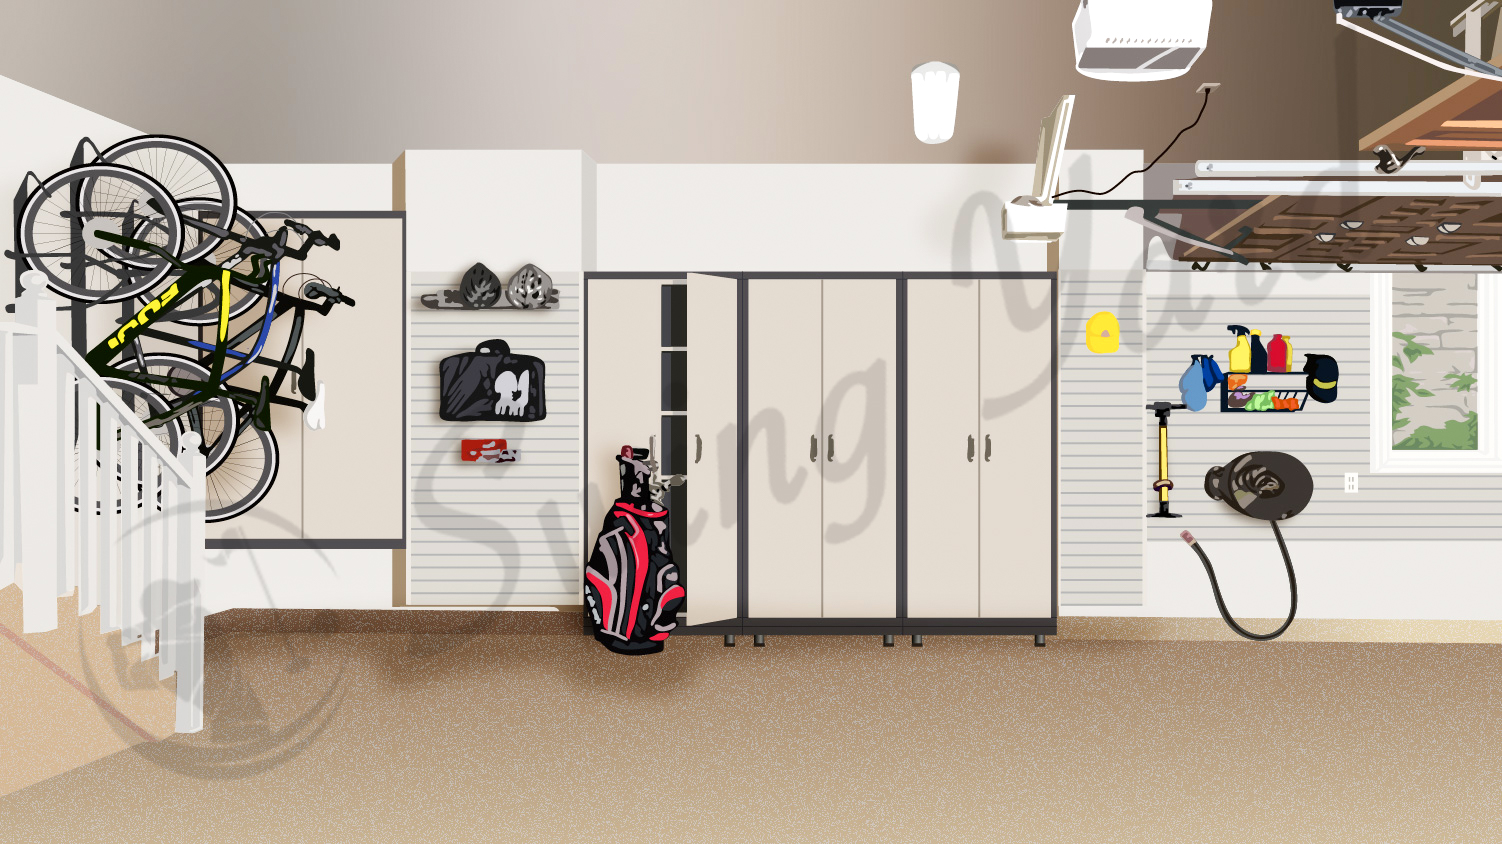 The garage is perfect for storing your golf gear